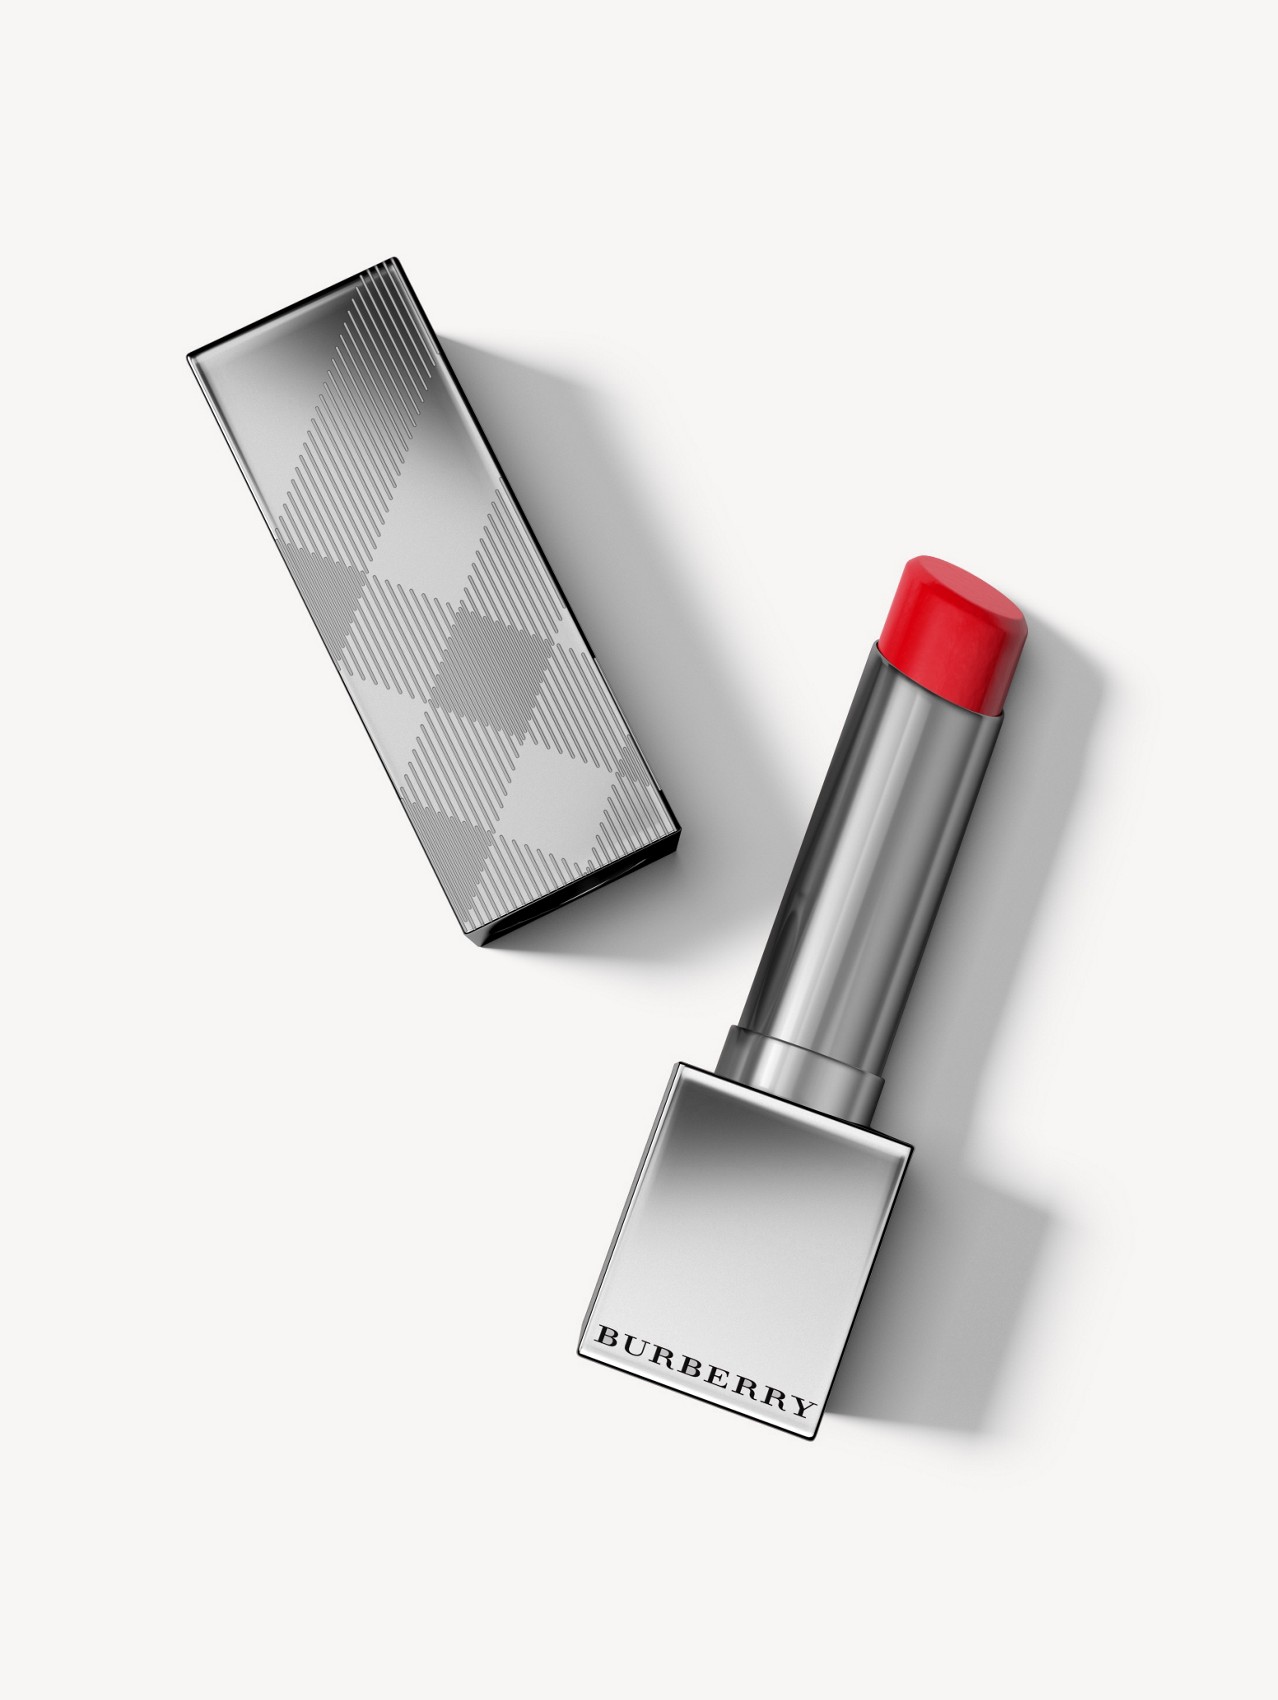 Burberry Kisses Sheer – Military Red No.305